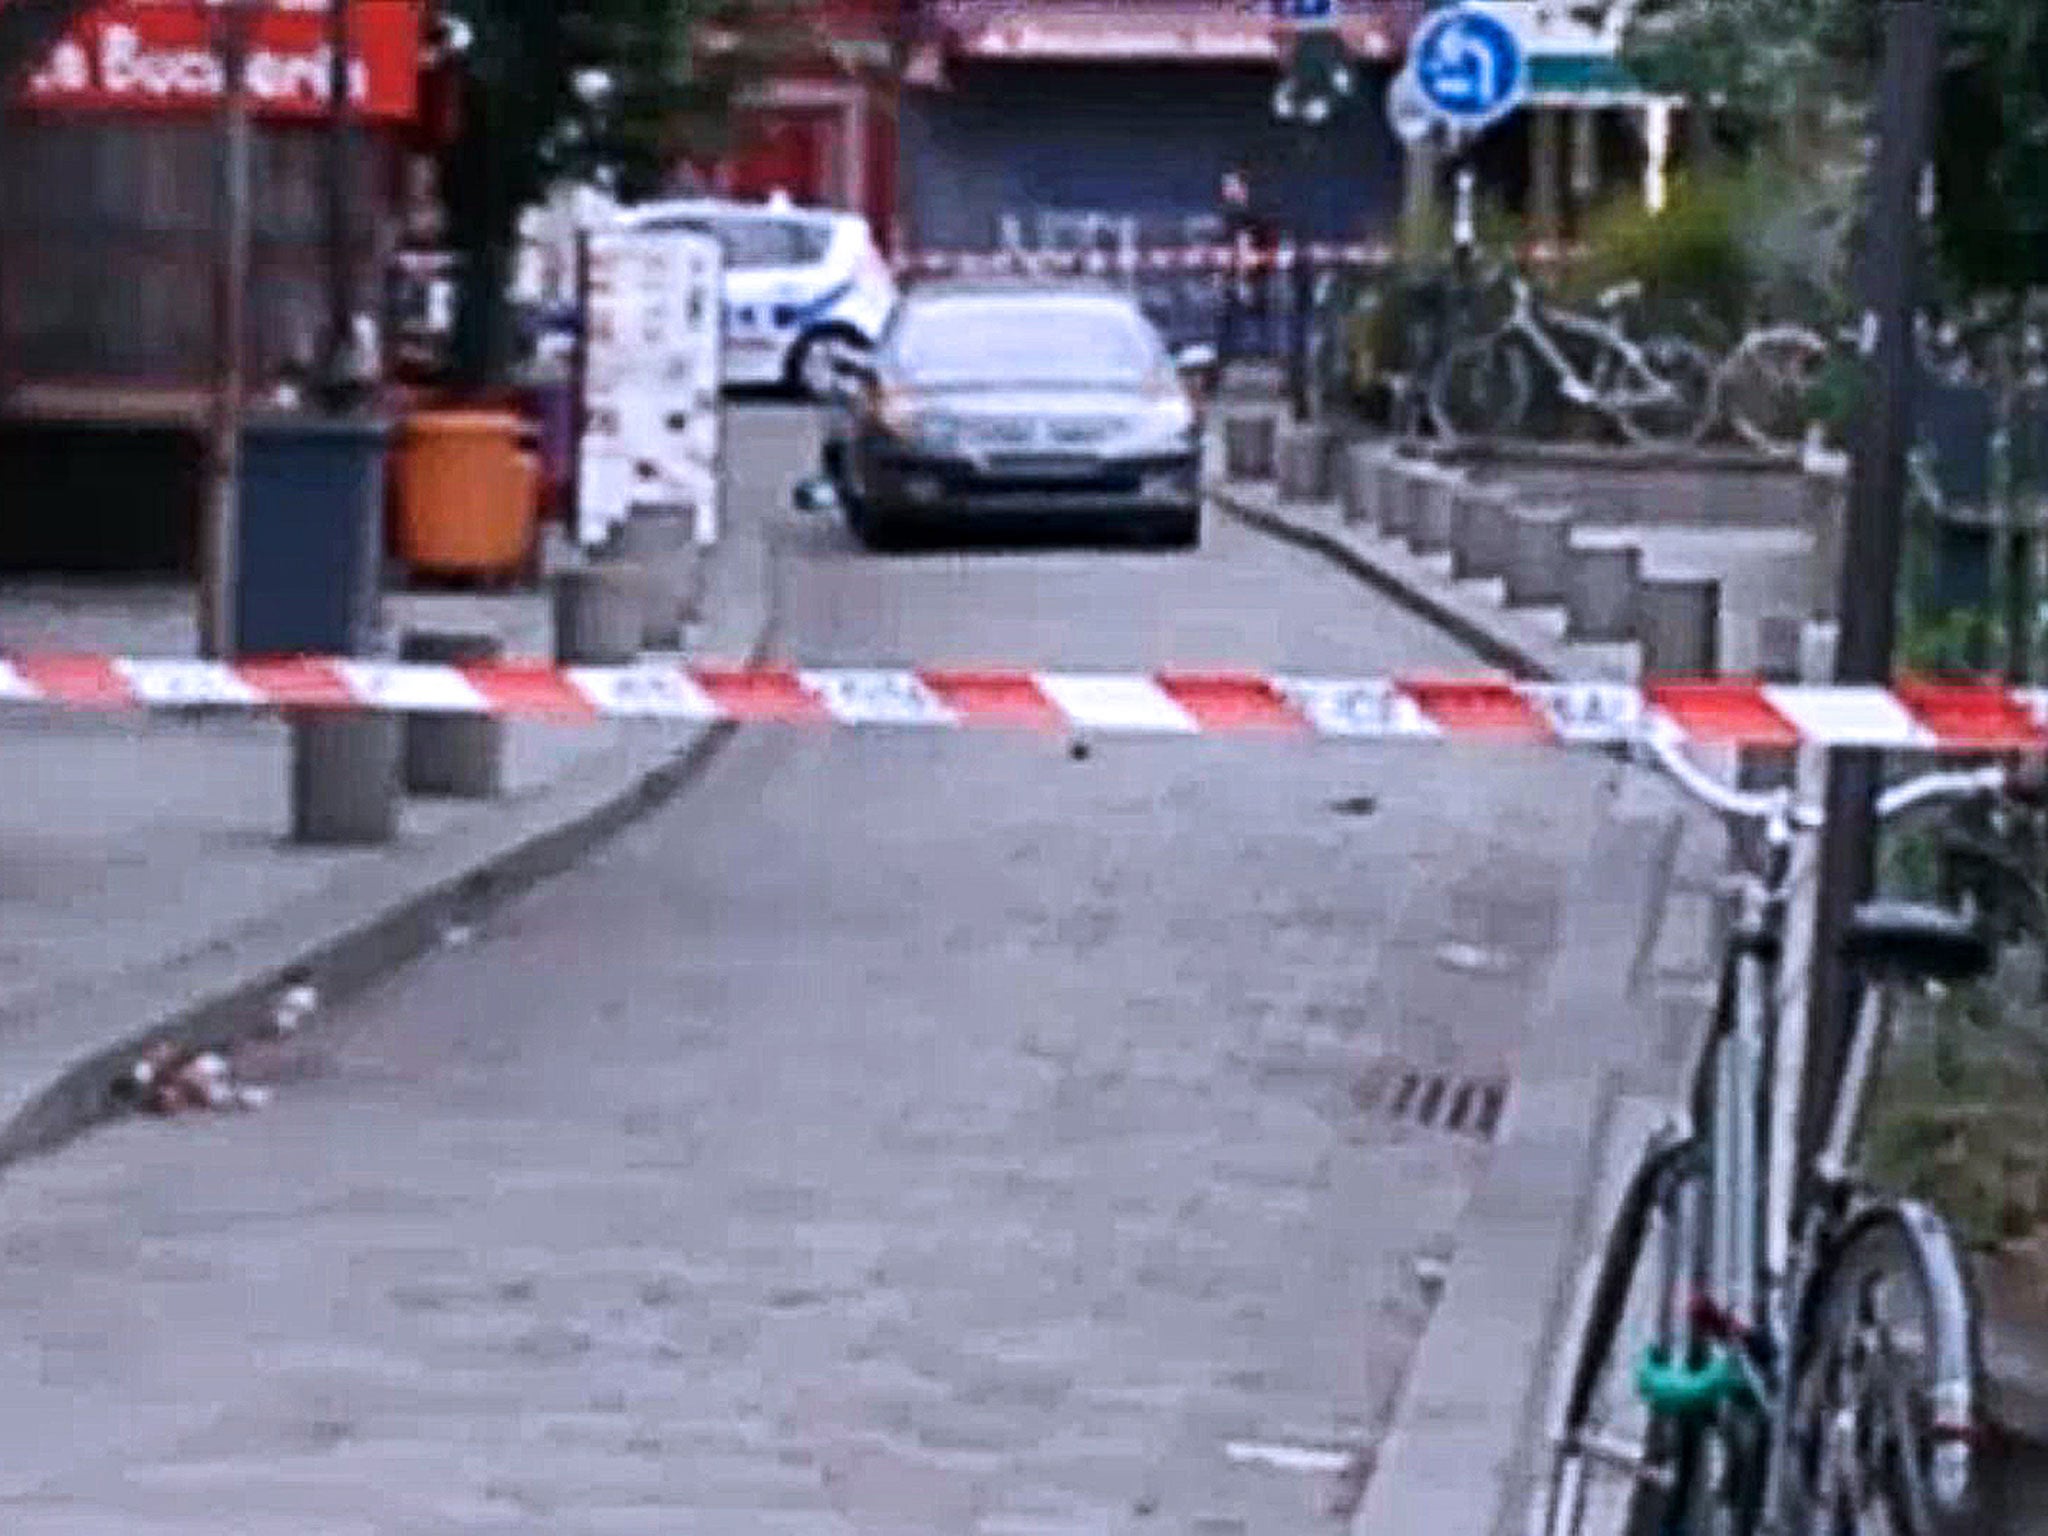 A car containing gas cannisters discovered near Notre Dame cathedral in Paris on 4 September.